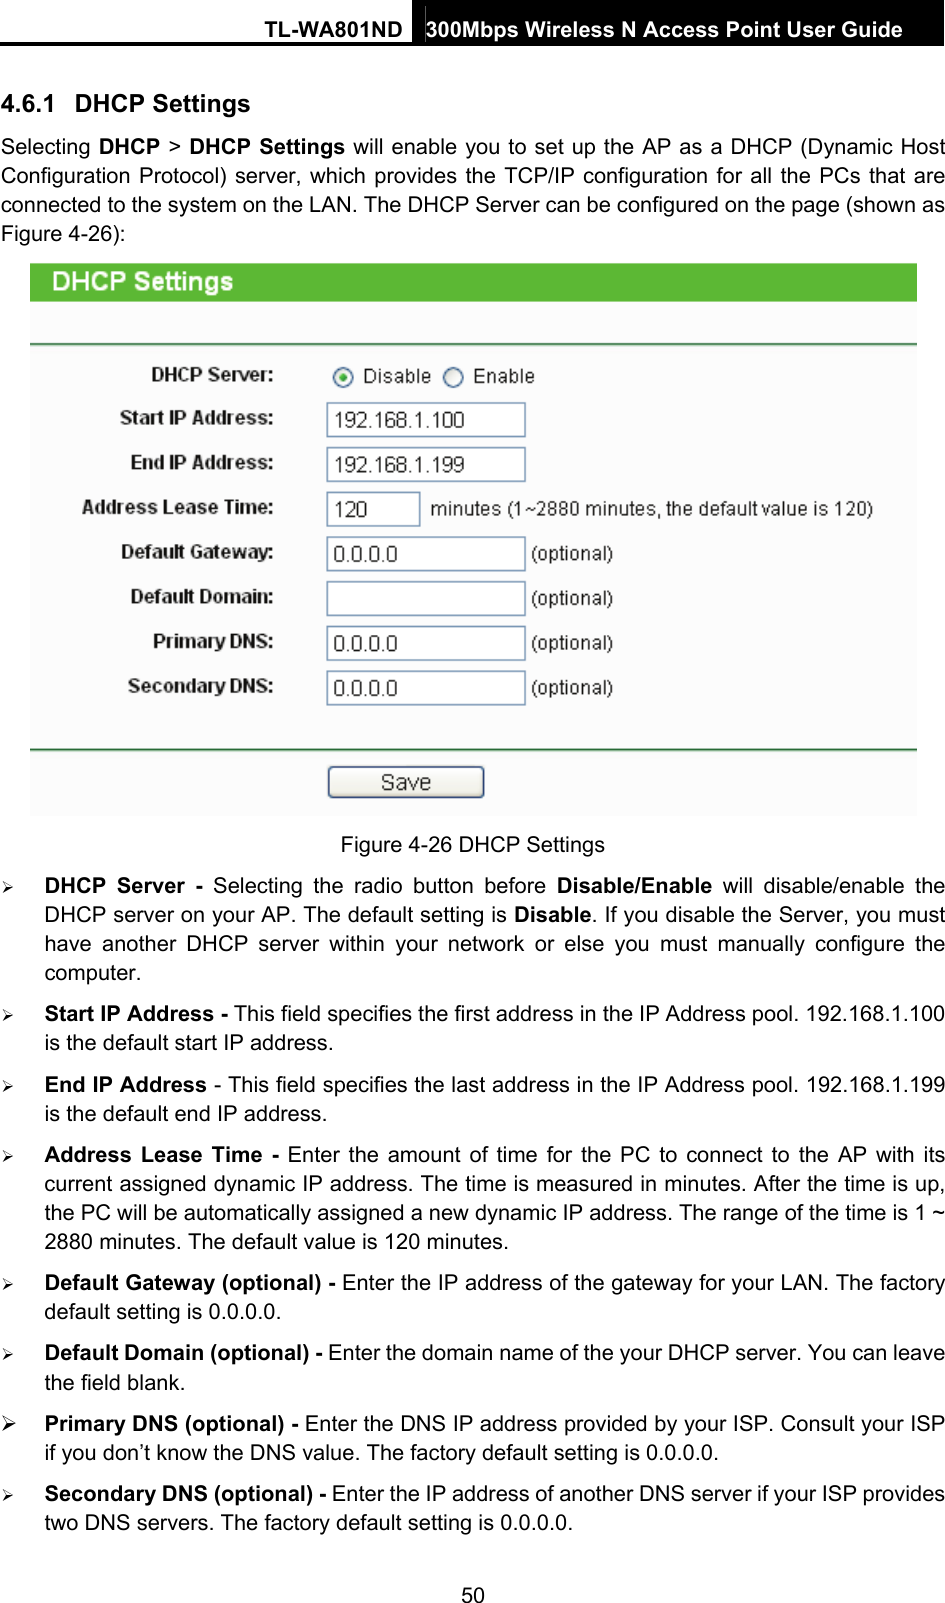 TL-WA801ND 300Mbps Wireless N Access Point User Guide  50 4.6.1  DHCP Settings Selecting DHCP &gt; DHCP Settings will enable you to set up the AP as a DHCP (Dynamic Host Configuration Protocol) server, which provides the TCP/IP configuration for all the PCs that are connected to the system on the LAN. The DHCP Server can be configured on the page (shown as Figure 4-26):  Figure 4-26 DHCP Settings ¾ DHCP Server - Selecting the radio button before Disable/Enable will disable/enable the DHCP server on your AP. The default setting is Disable. If you disable the Server, you must have another DHCP server within your network or else you must manually configure the computer. ¾ Start IP Address - This field specifies the first address in the IP Address pool. 192.168.1.100 is the default start IP address.   ¾ End IP Address - This field specifies the last address in the IP Address pool. 192.168.1.199 is the default end IP address.   ¾ Address Lease Time - Enter the amount of time for the PC to connect to the AP with its current assigned dynamic IP address. The time is measured in minutes. After the time is up, the PC will be automatically assigned a new dynamic IP address. The range of the time is 1 ~ 2880 minutes. The default value is 120 minutes. ¾ Default Gateway (optional) - Enter the IP address of the gateway for your LAN. The factory default setting is 0.0.0.0. ¾ Default Domain (optional) - Enter the domain name of the your DHCP server. You can leave the field blank. ¾ Primary DNS (optional) - Enter the DNS IP address provided by your ISP. Consult your ISP if you don’t know the DNS value. The factory default setting is 0.0.0.0. ¾ Secondary DNS (optional) - Enter the IP address of another DNS server if your ISP provides two DNS servers. The factory default setting is 0.0.0.0. 